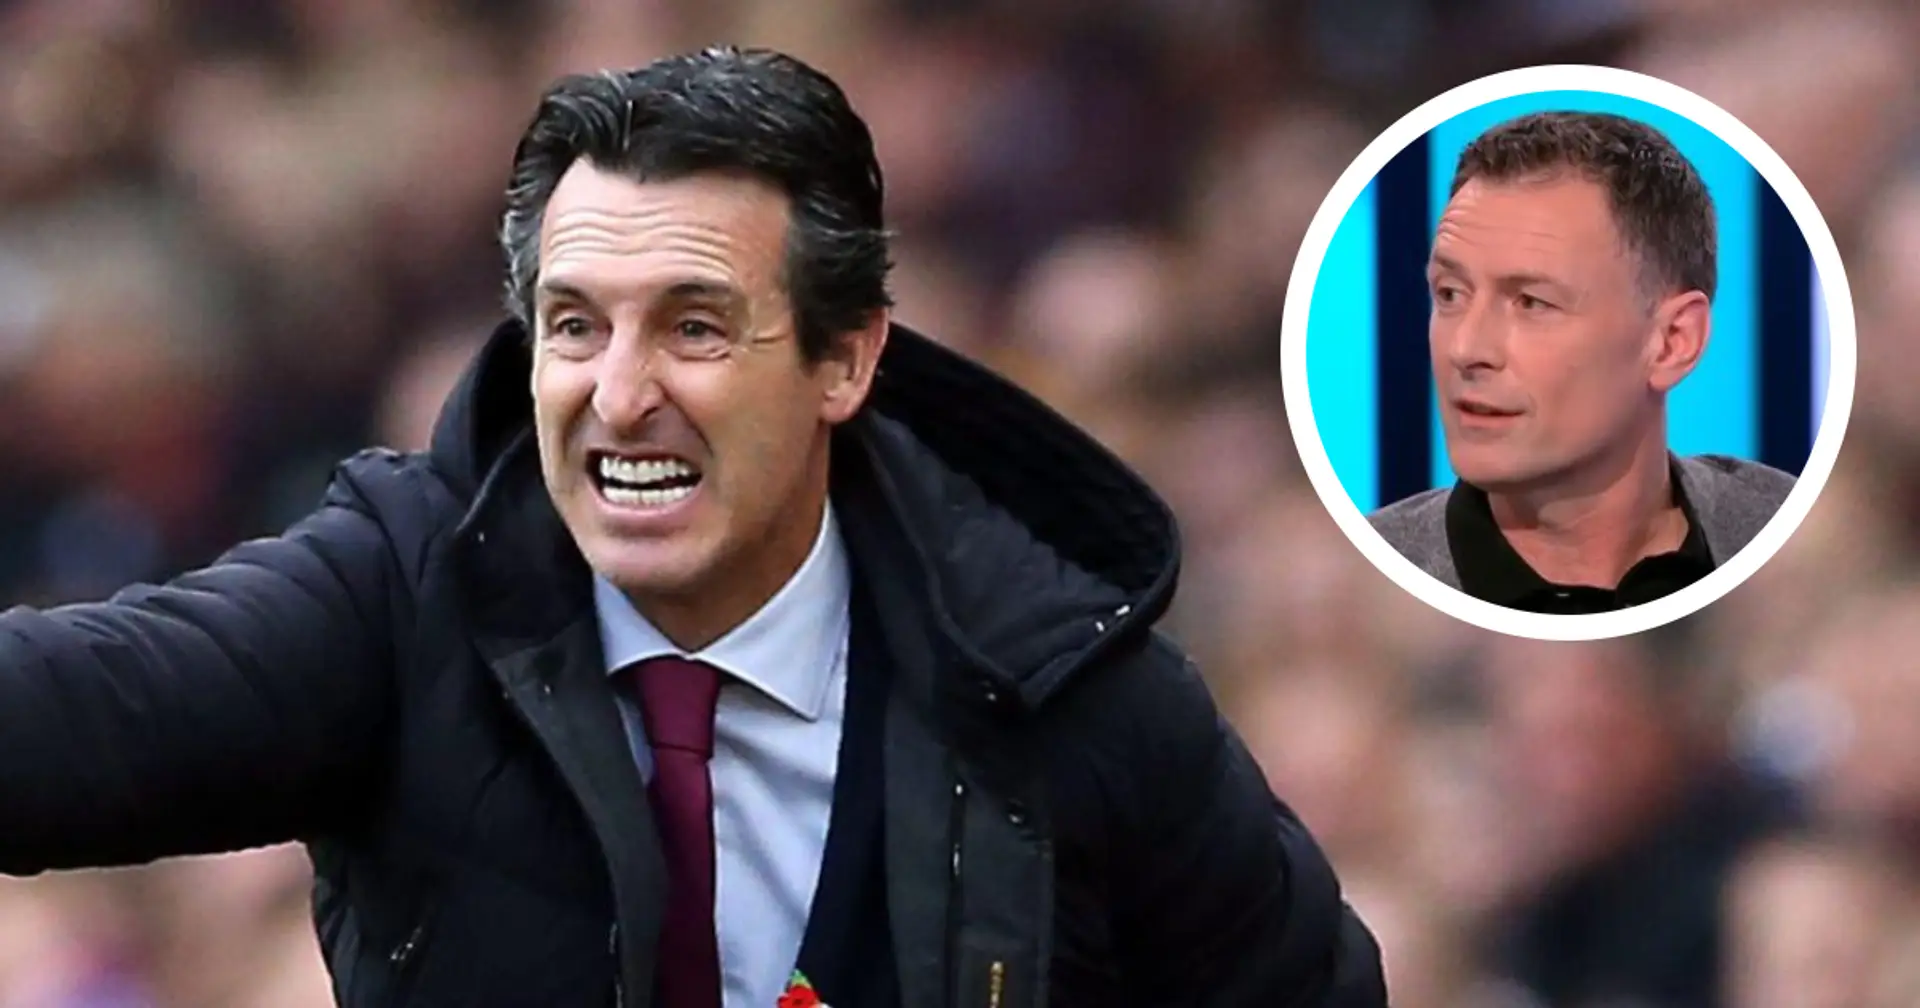 'Emery could set his team up to frustrate Liverpool': Chris Sutton makes Aston Villa clash prediction